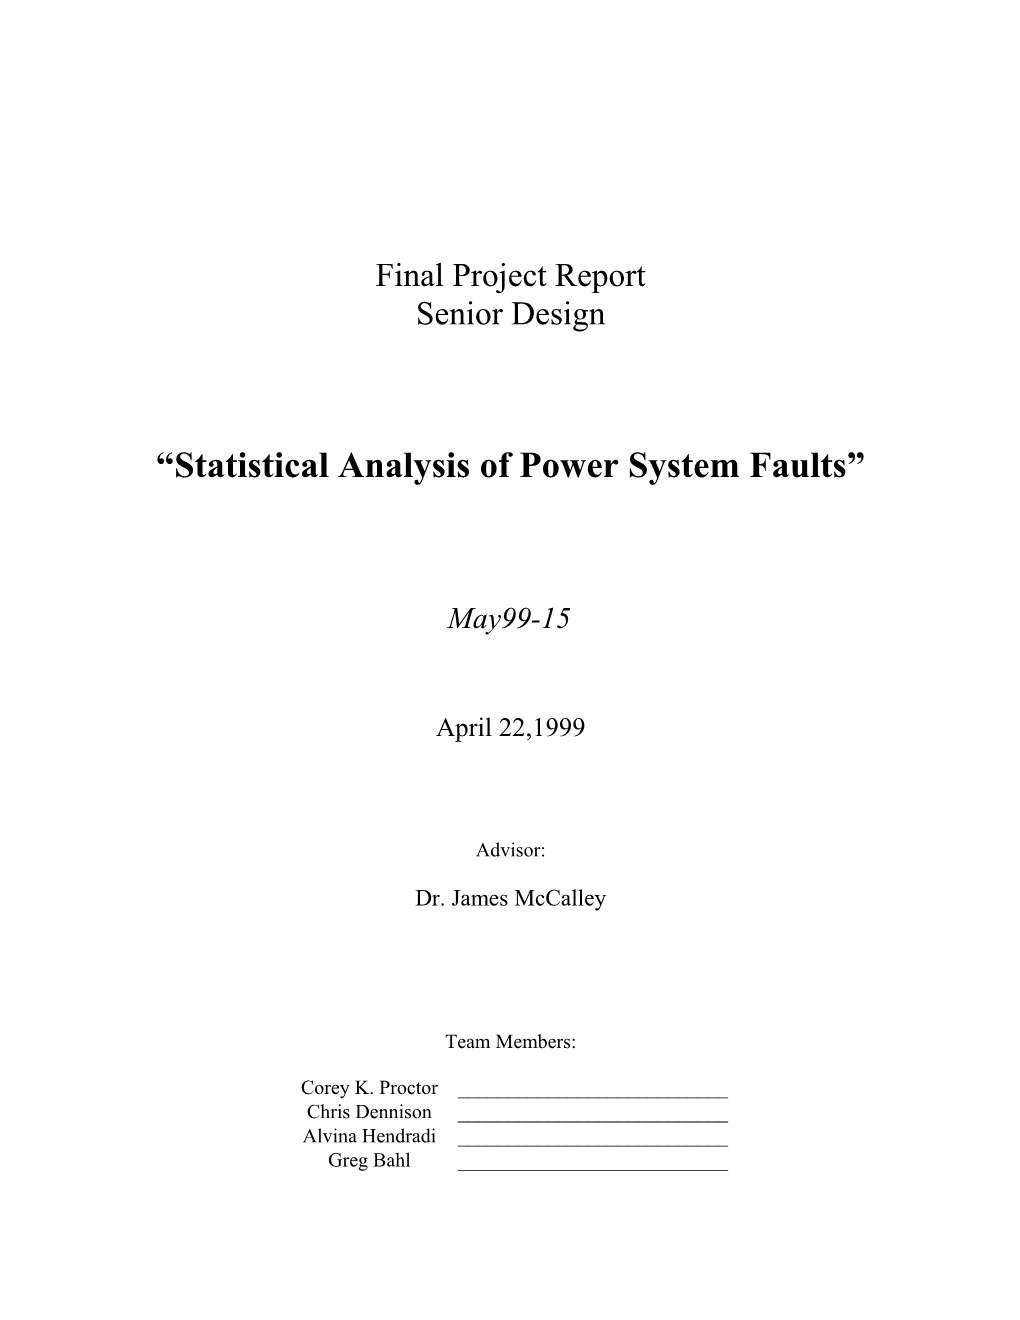 Statistical Analysis of Power System Faults